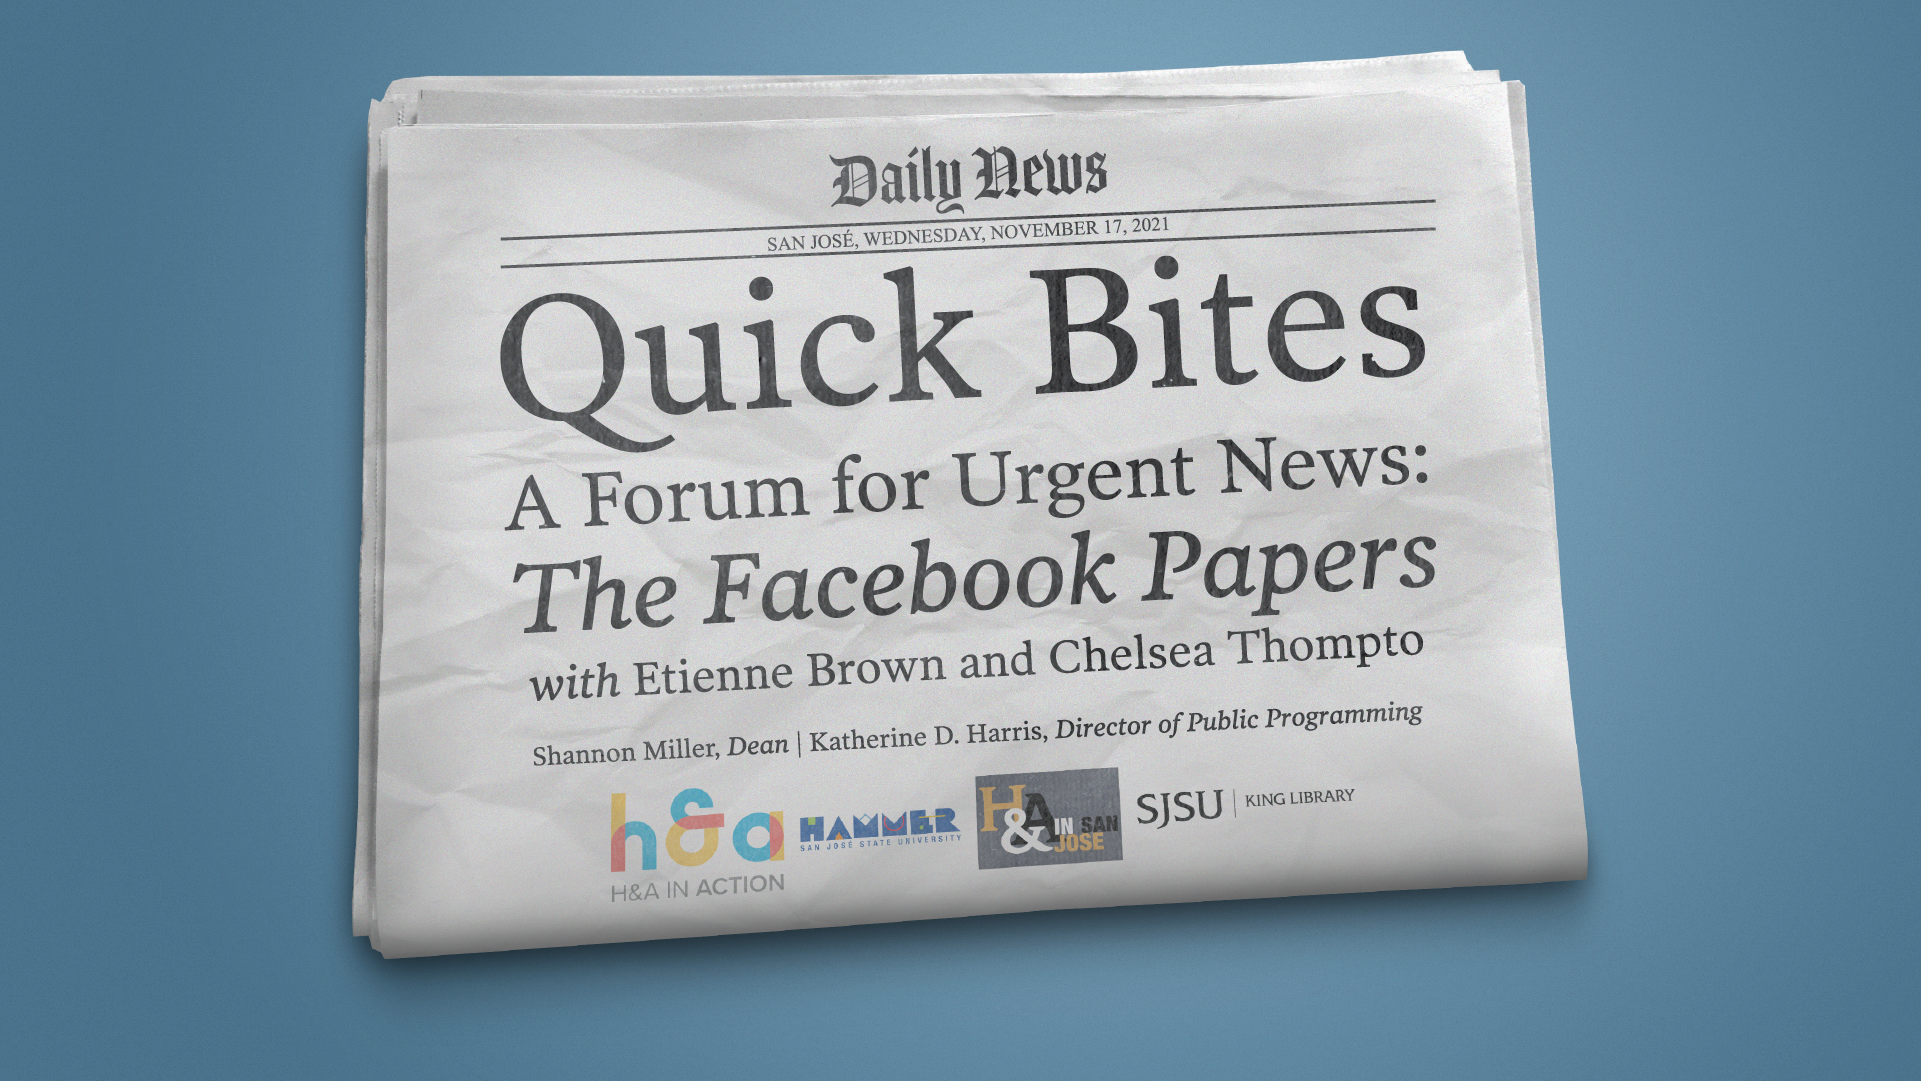 newspaper with text for facebook papers event